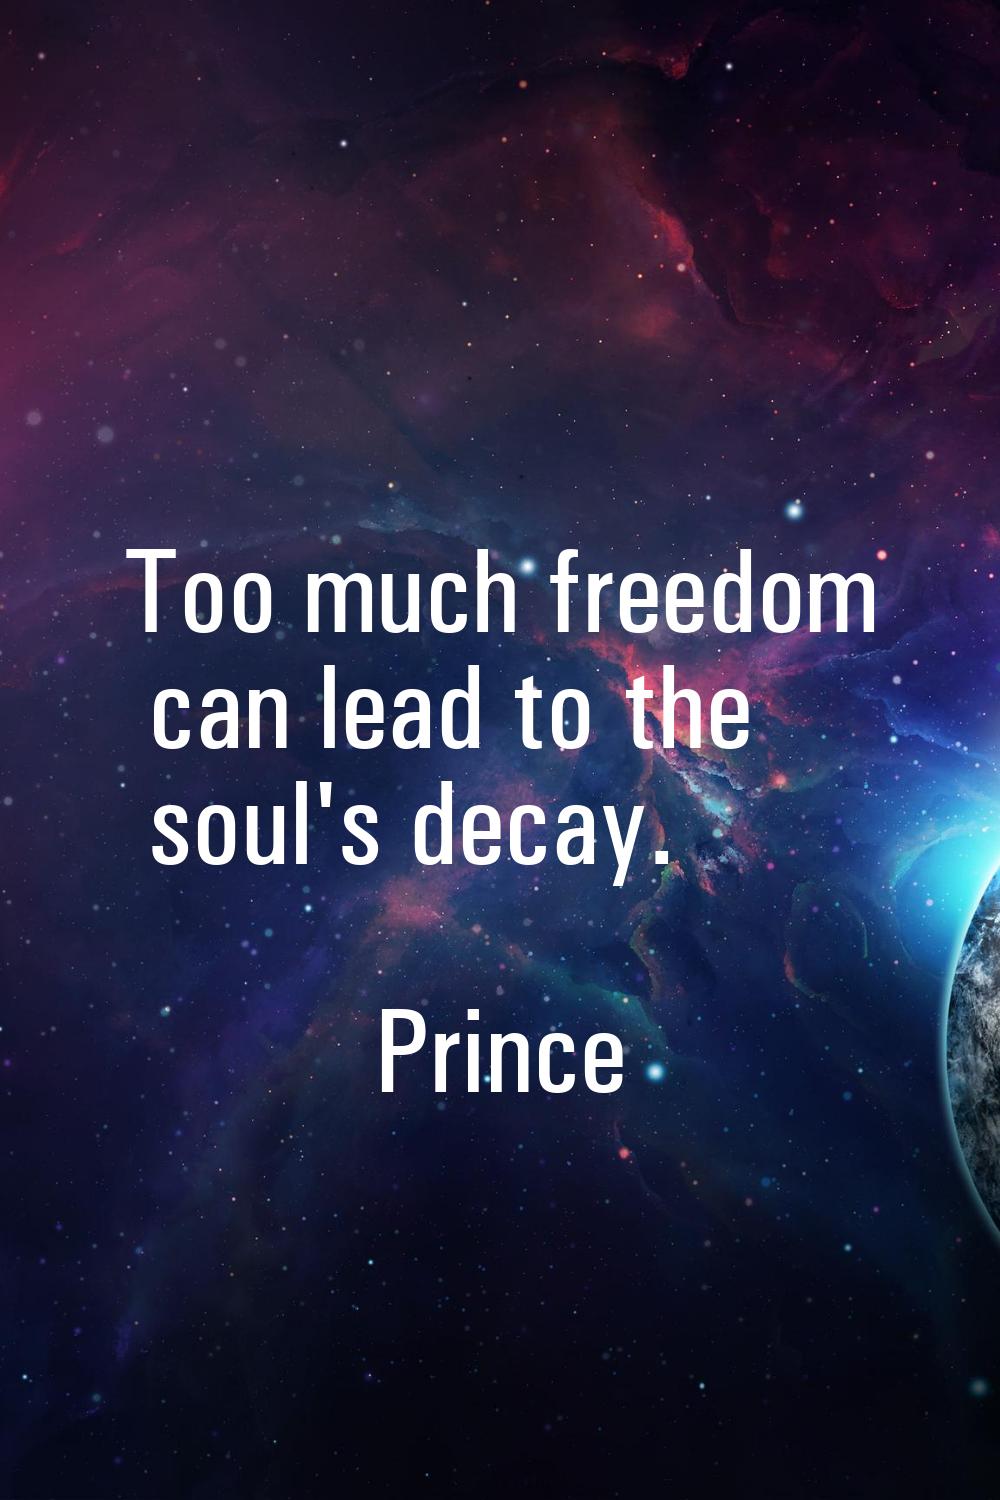 Too much freedom can lead to the soul's decay.